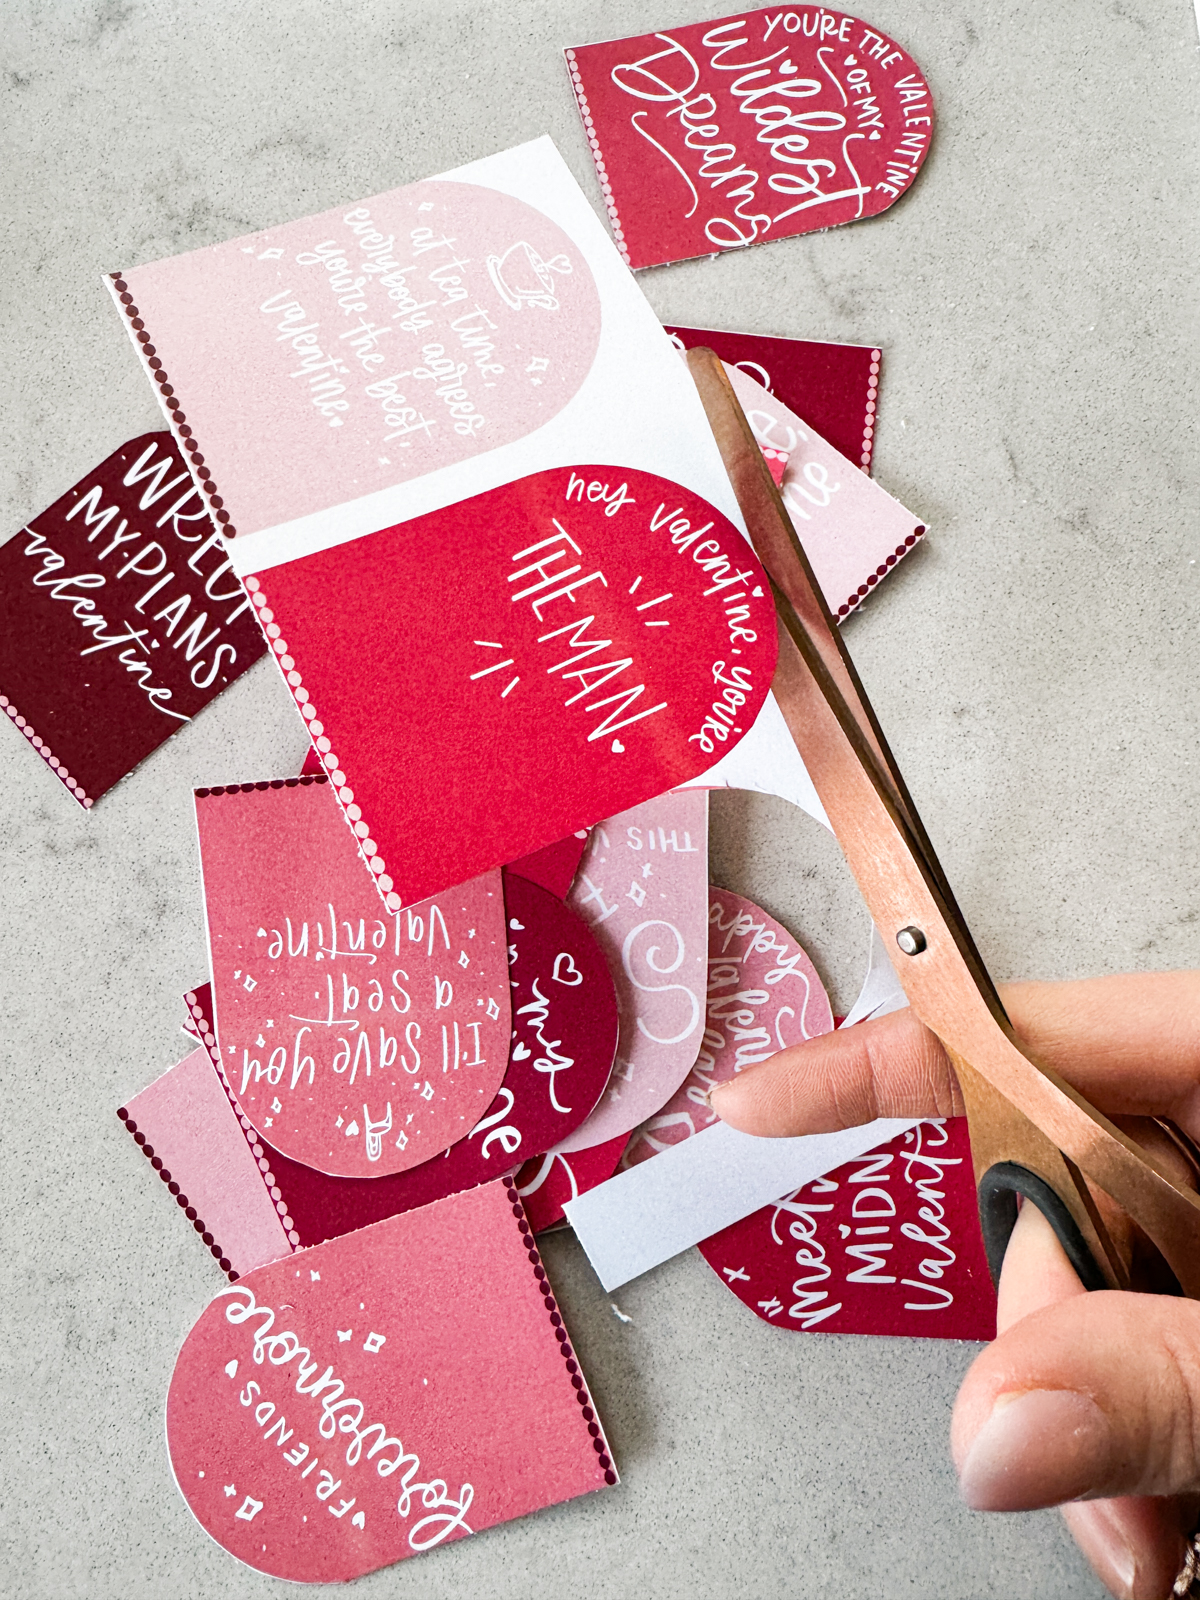 taylor swift themed valentines day cards printed and cut to size (arch shaped pink and deep burgundy color with white hand lettered song lyrics) shown on marble countertop being cut to size with rose gold scissors. valentine in focus reads: hey valentine, you're the man